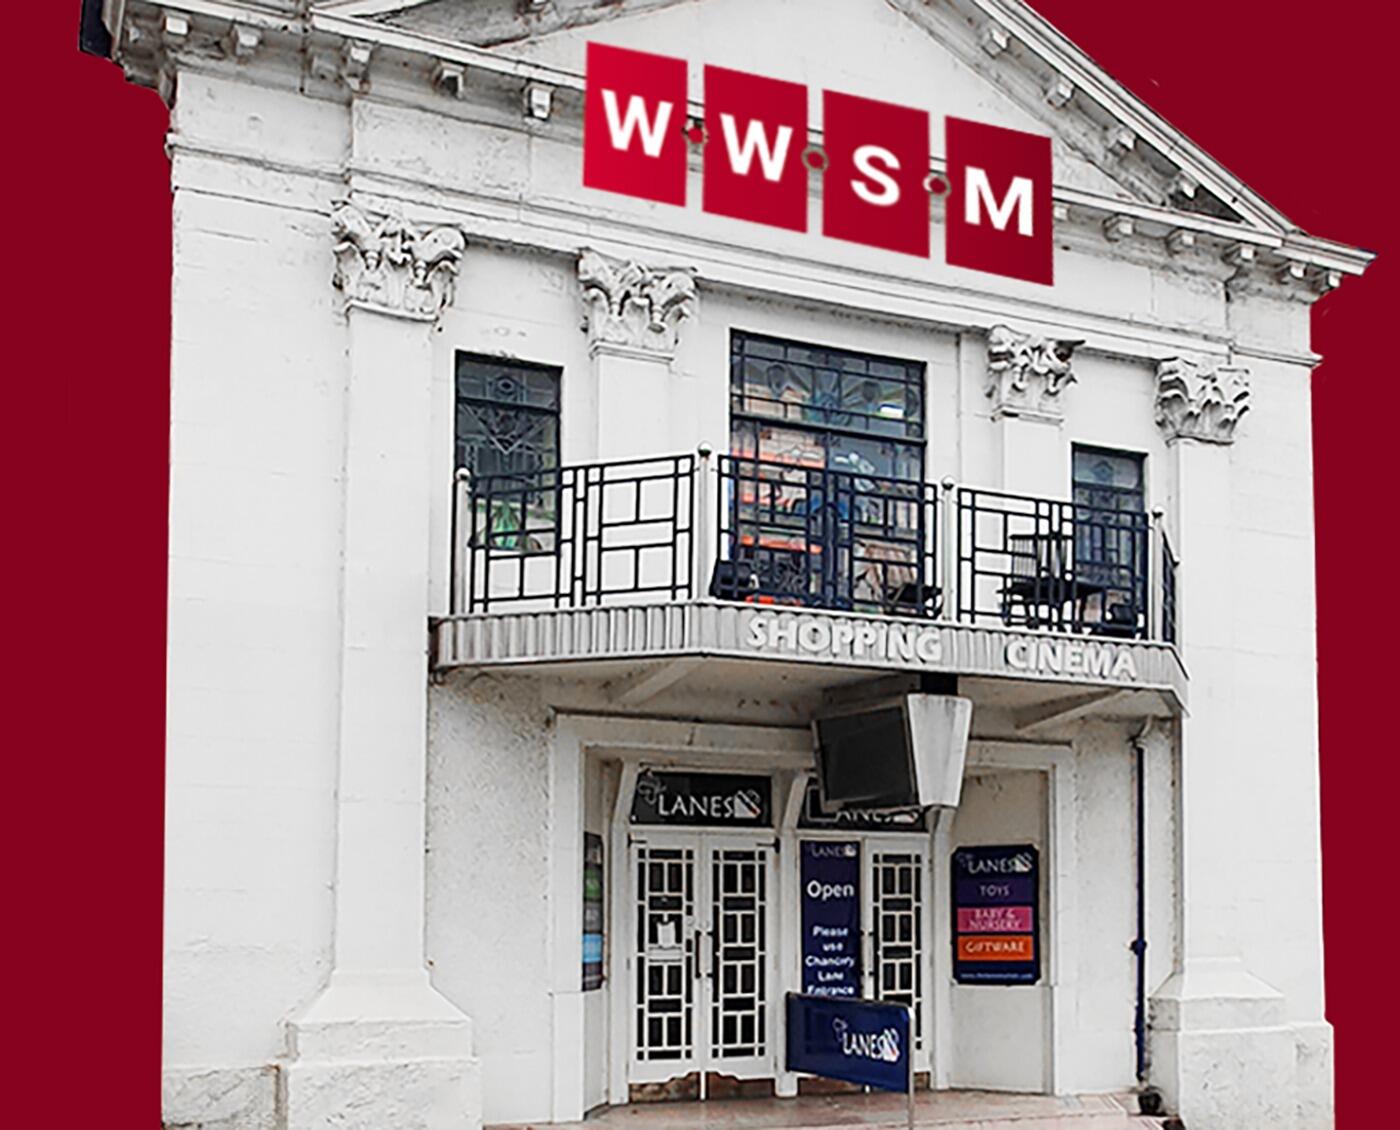 Welcome to WWSM|For Toys, Model Kits, Health & Beauty, Homewares & Gifts. Shopping Online and In-Store at The Lanes Malton.